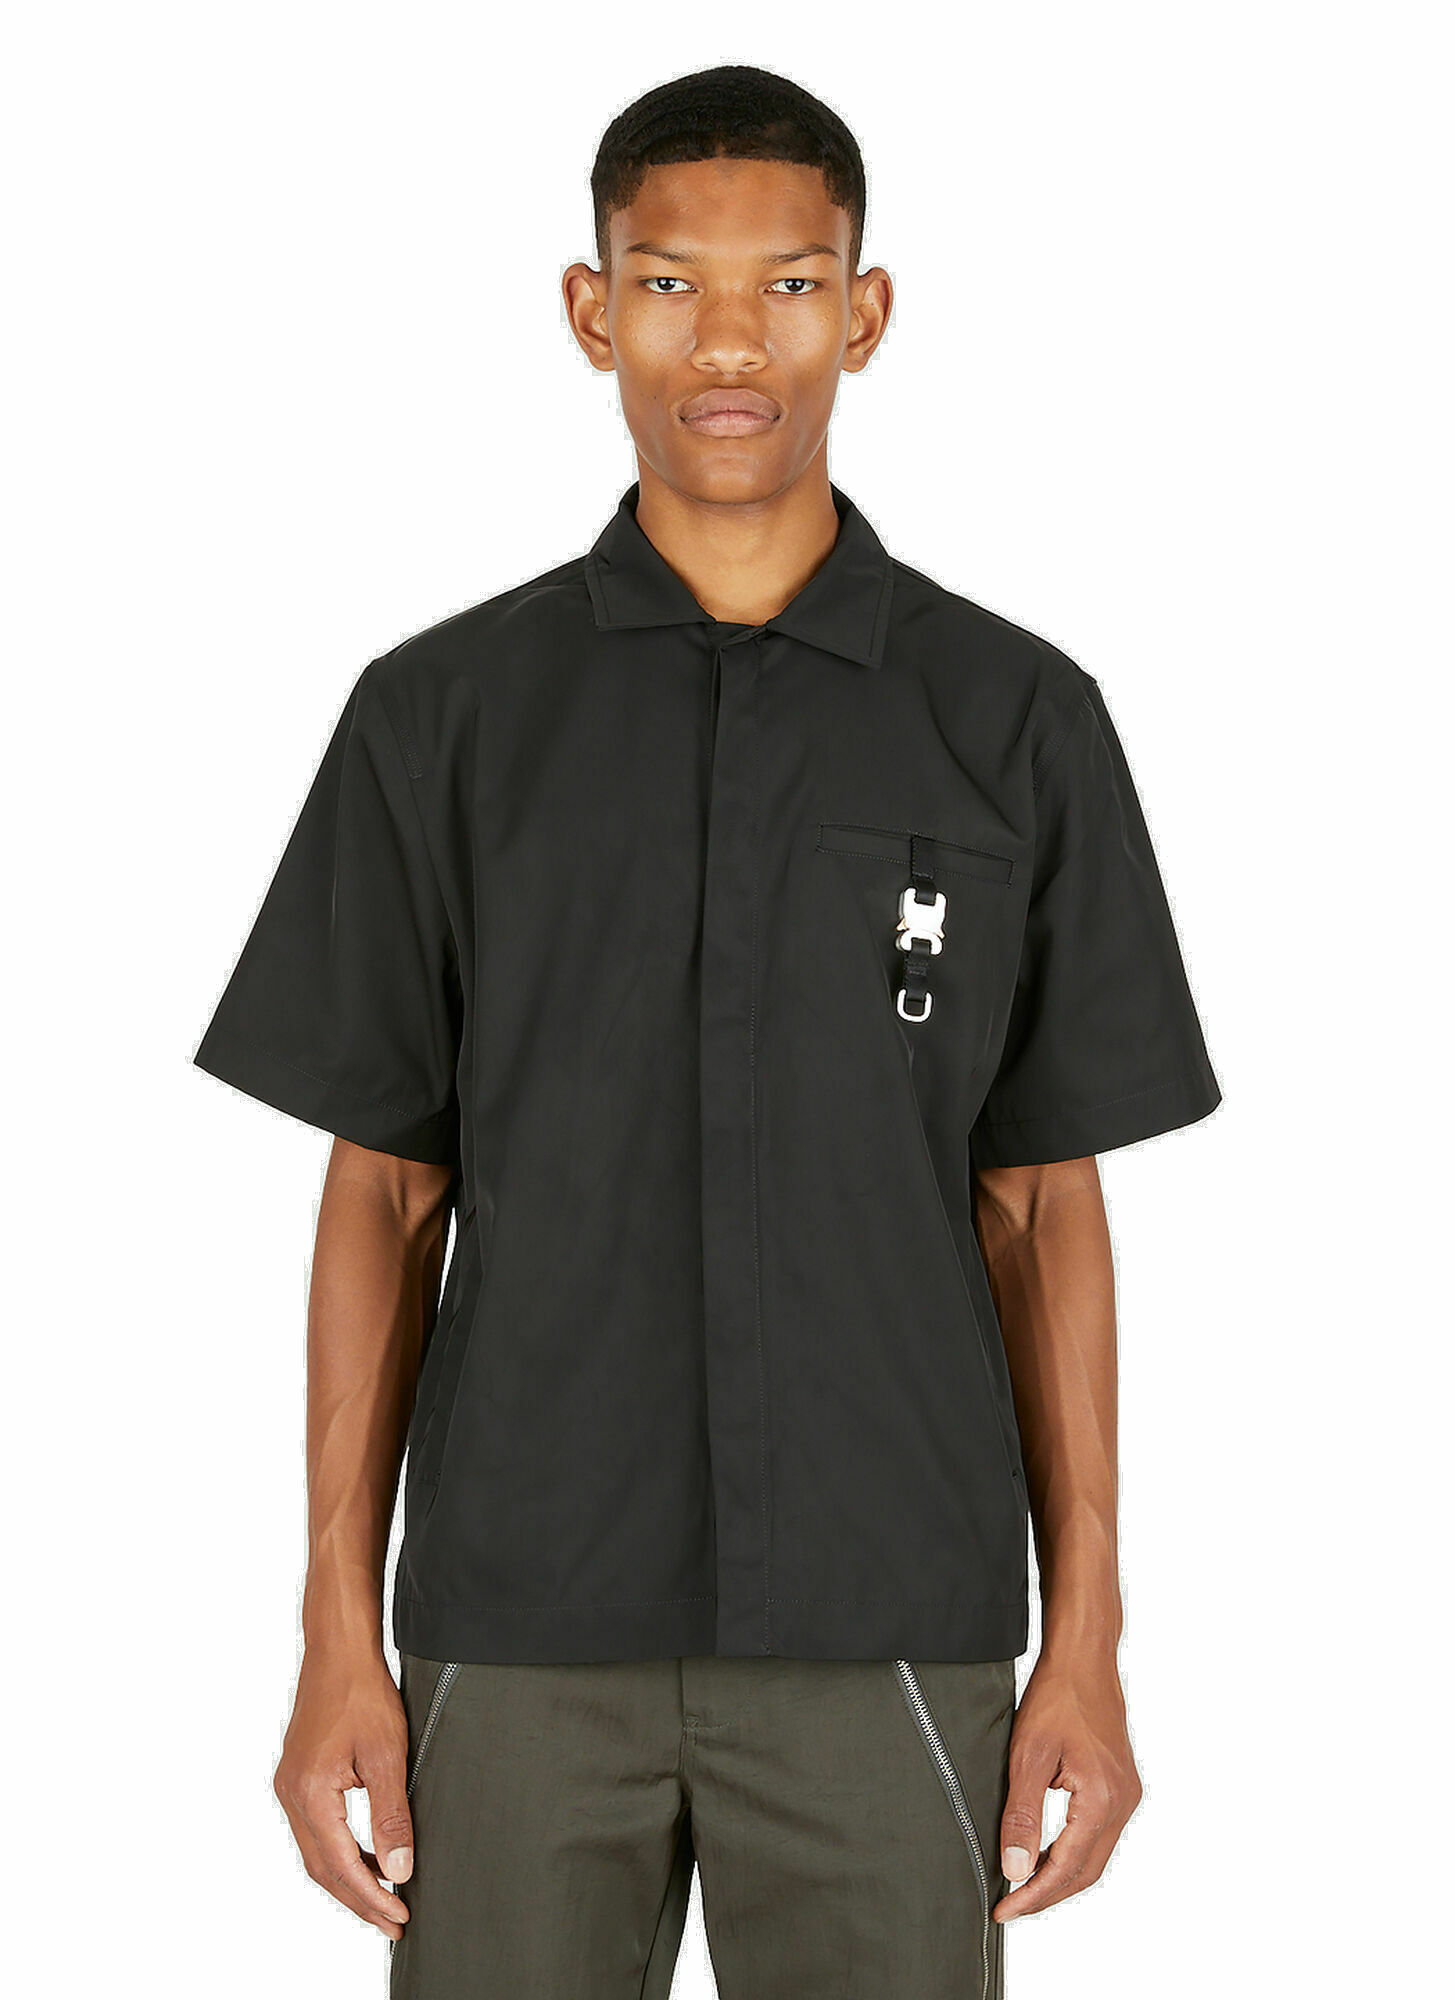 Photo: Rollercoaster Buckle Shirt in Black